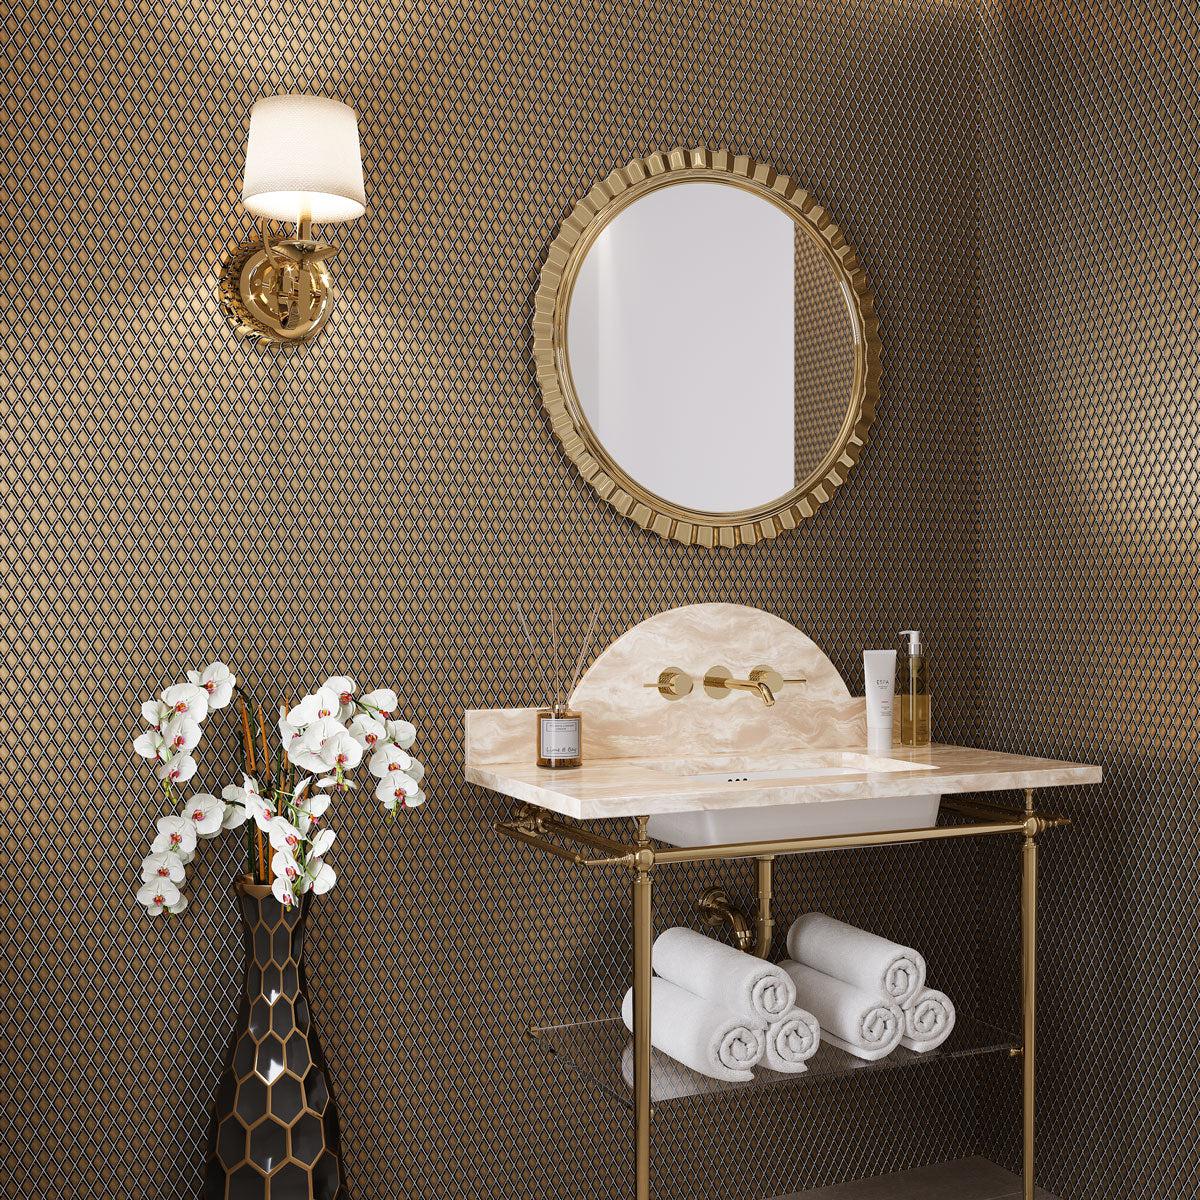 Gold Diamond Glass Mosaic Tiles for a downstairs bathroom wall